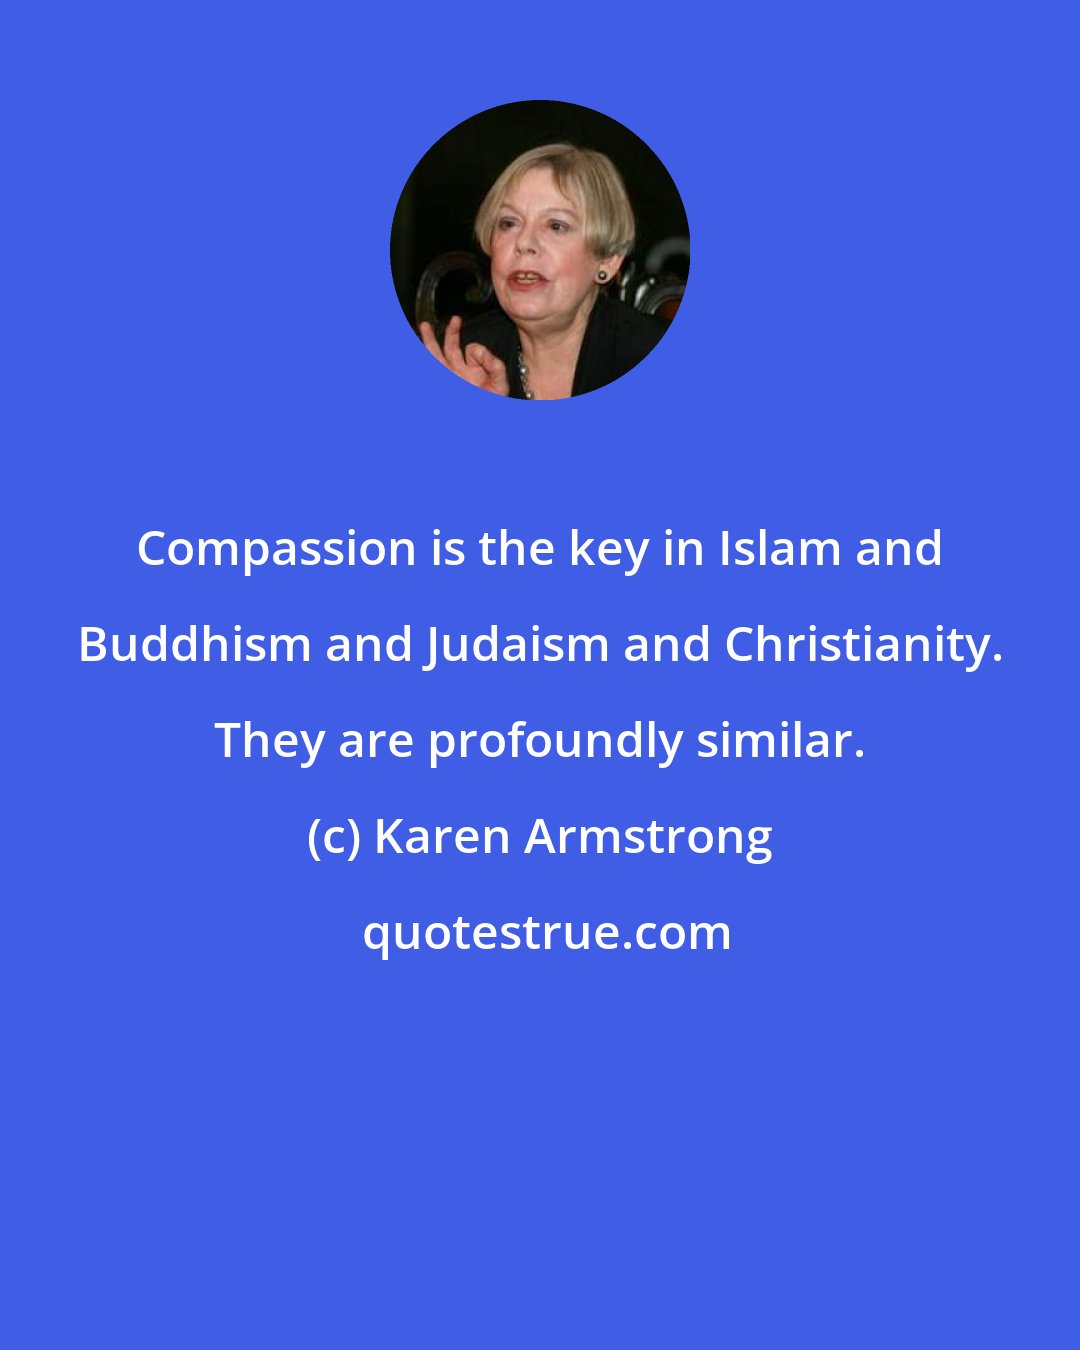 Karen Armstrong: Compassion is the key in Islam and Buddhism and Judaism and Christianity. They are profoundly similar.